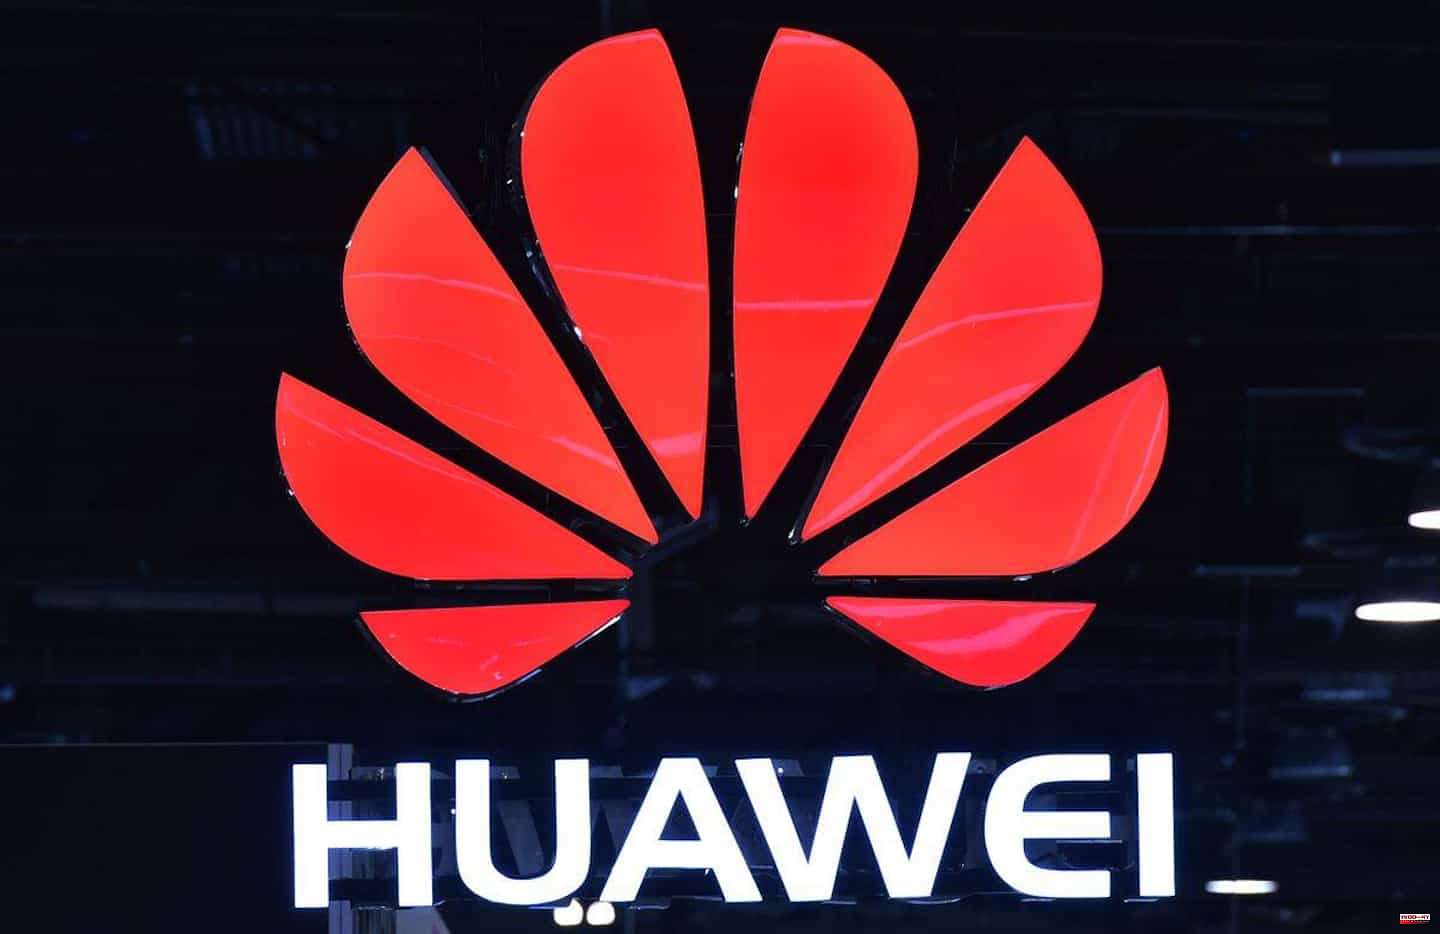 China condemns 'groundless' Huawei 5G ban in Canada